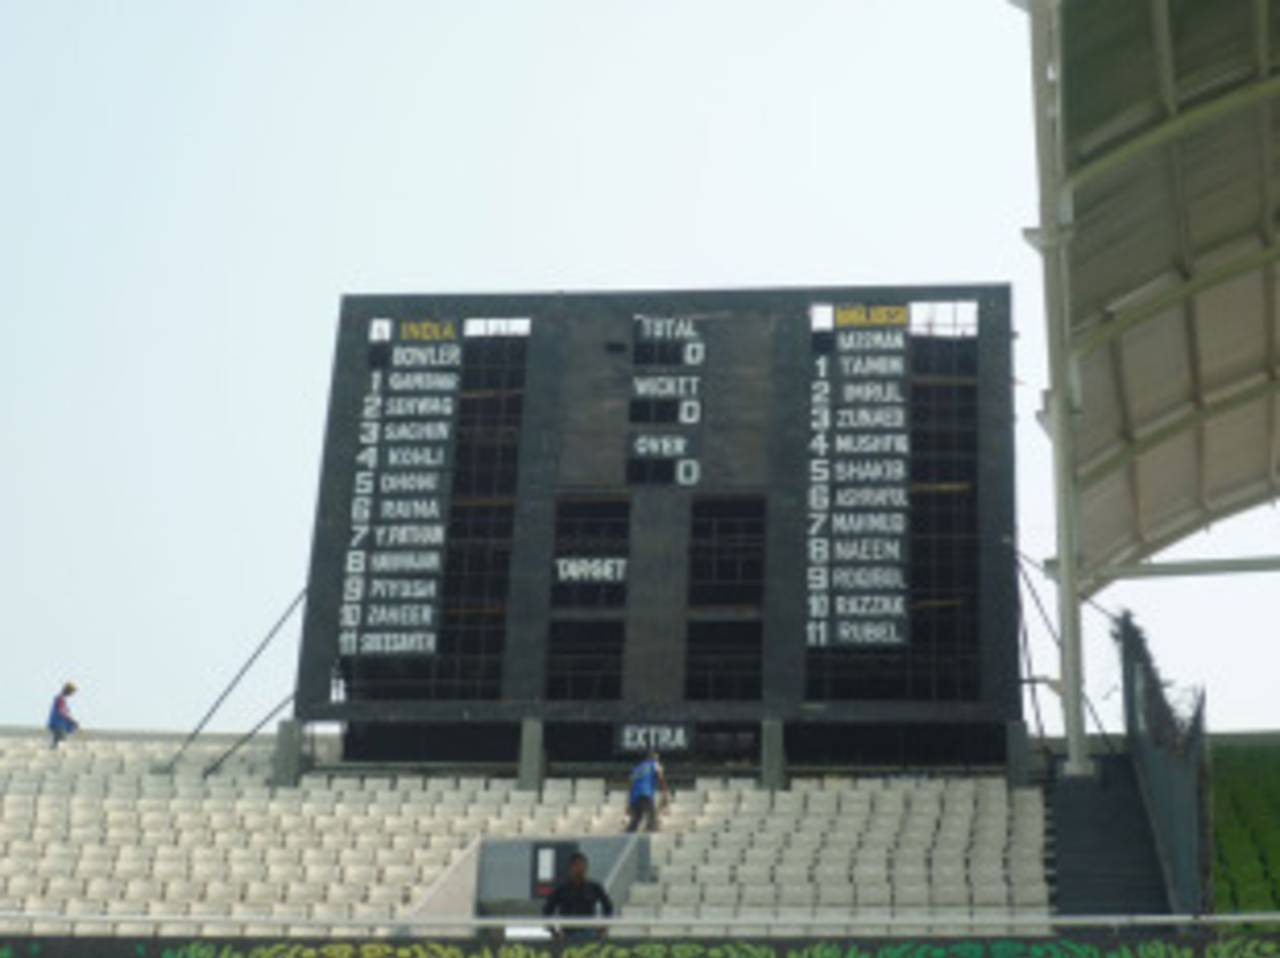 The scoreboard at the Shere Bangla National Stadium waits in eager anticipation for the opening game of the World Cup&nbsp;&nbsp;&bull;&nbsp;&nbsp;ESPNcricinfo Ltd